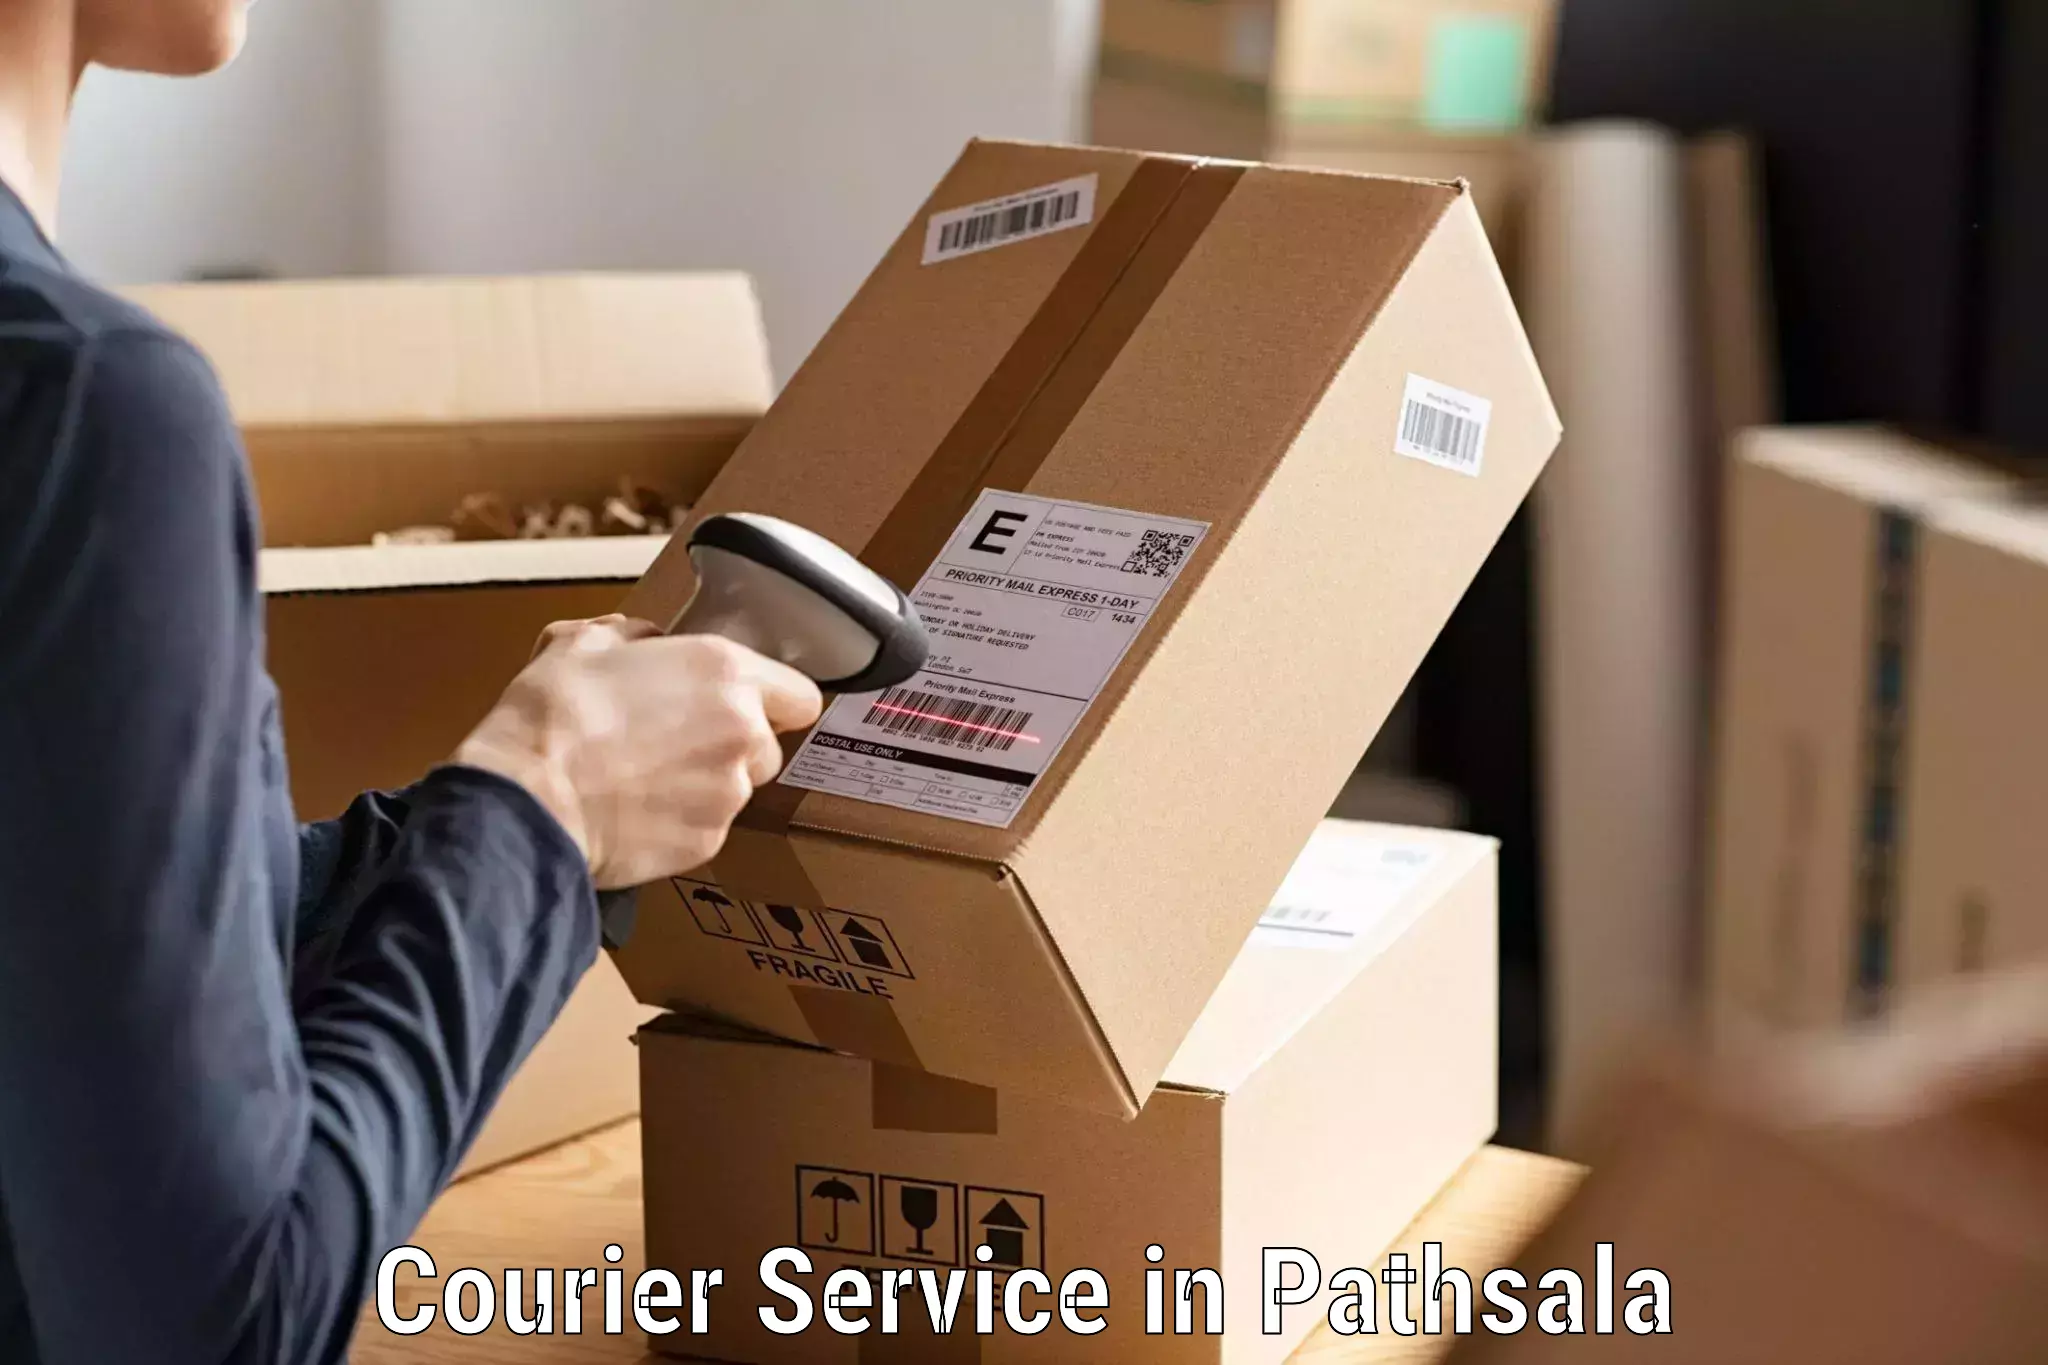 Parcel delivery automation in Pathsala